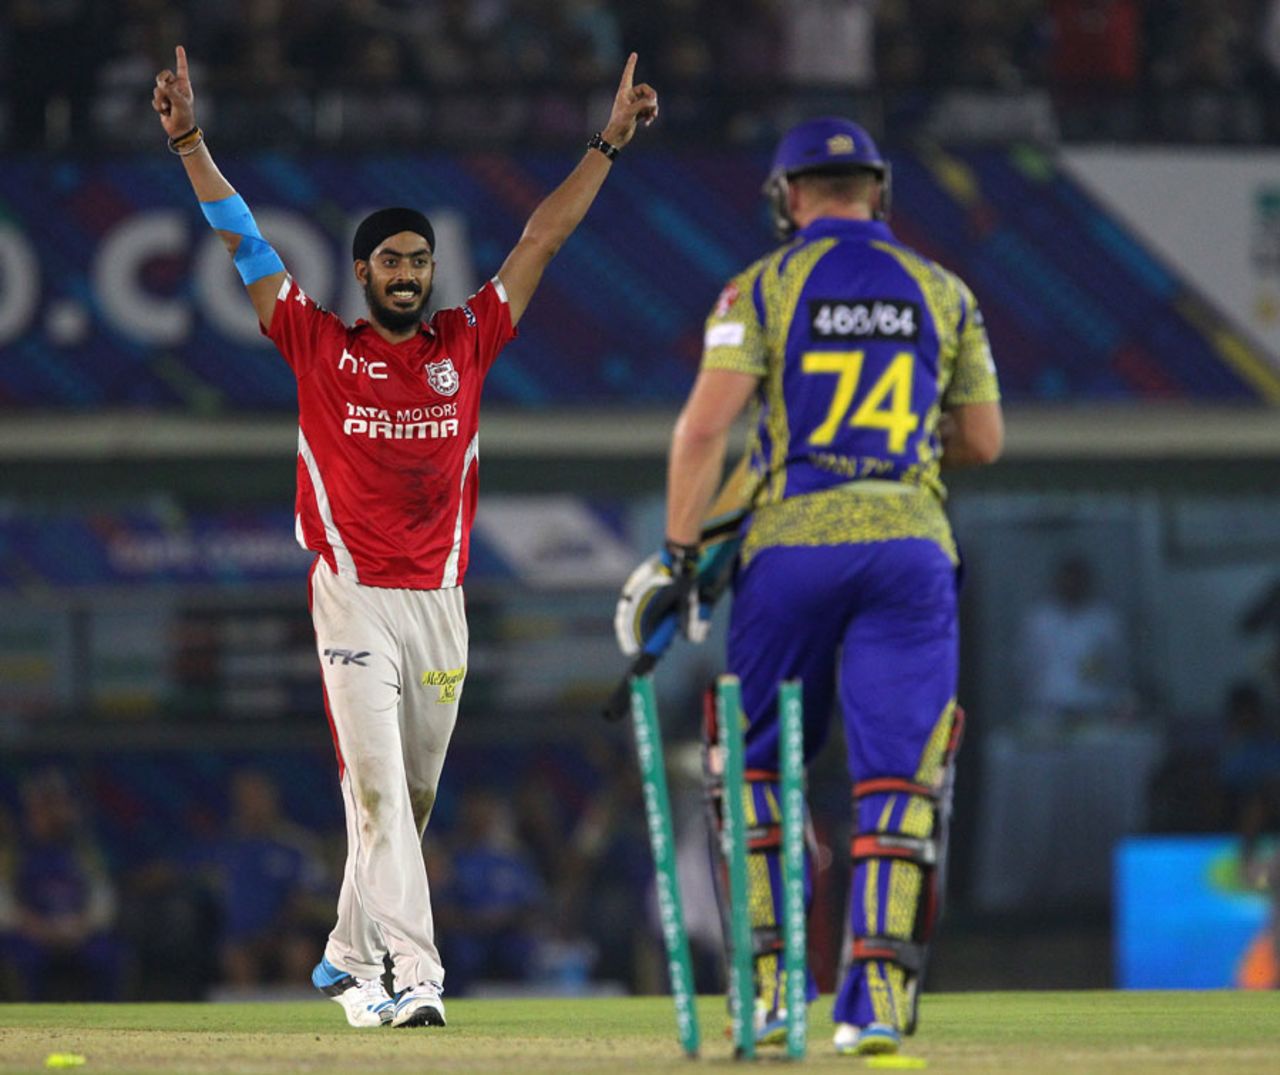 Anureet Singh took 3 for 12, his personal best, Cape Cobras v Kings XI Punjab, Champions League T20, Group B, Mohali, September 28, 2014